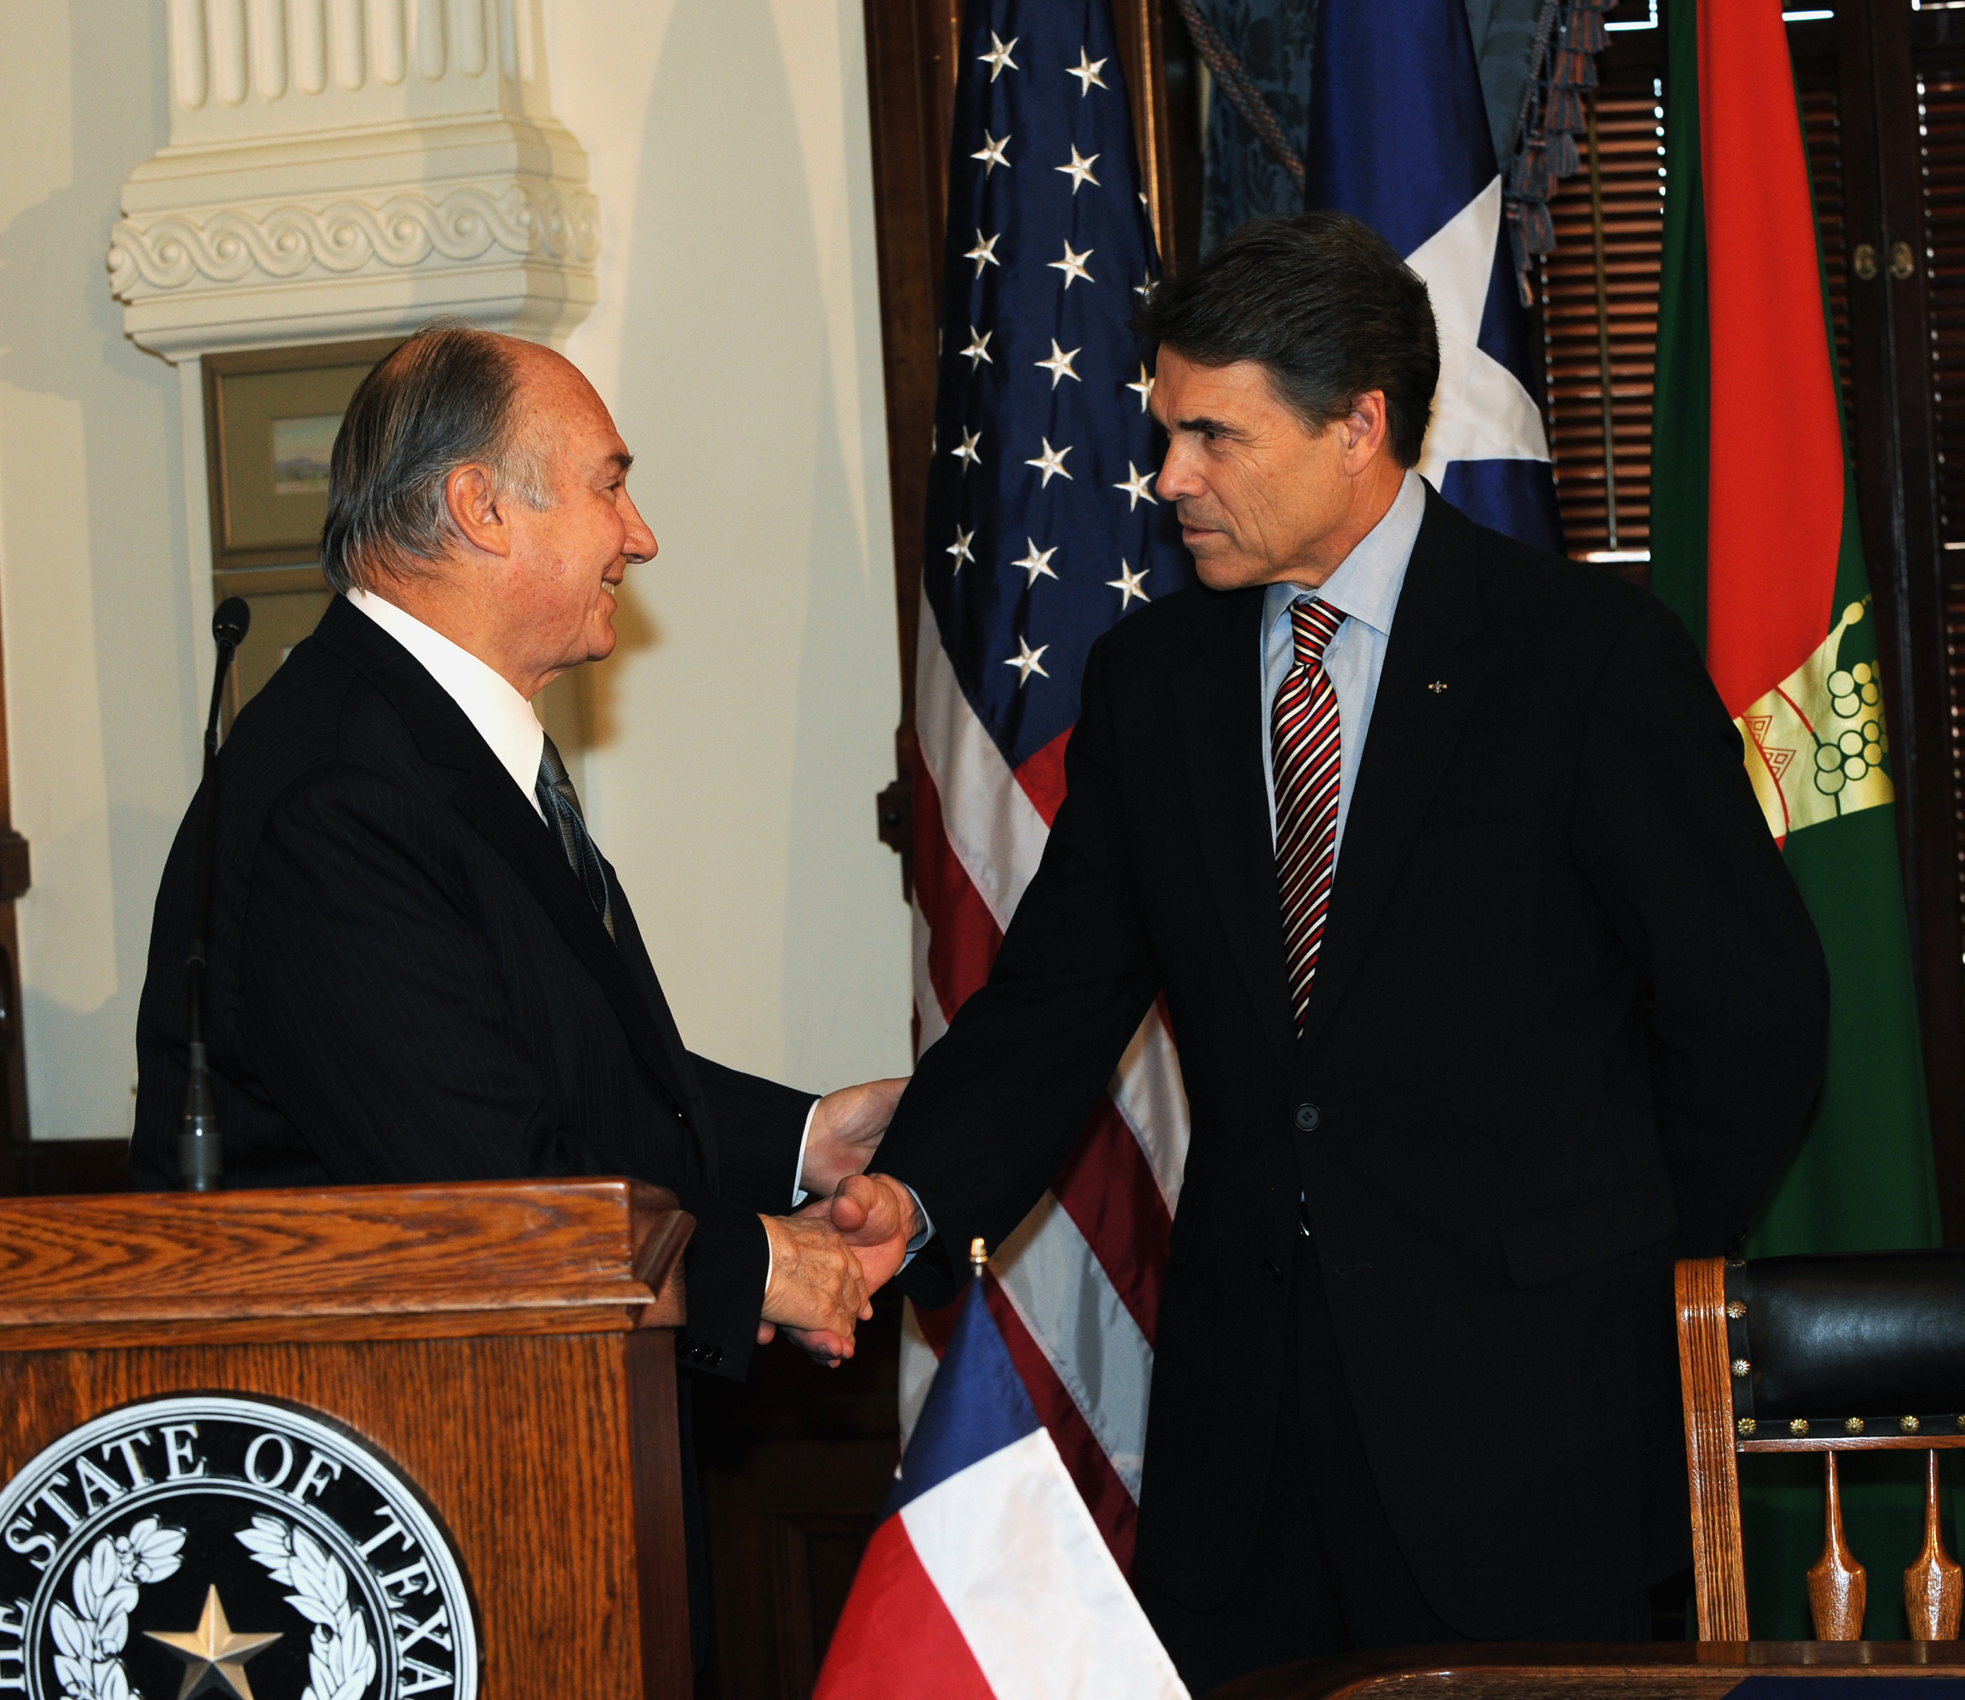 Mawlana Hazar Imam and Governor Rick Perry shake hands prior to signing the Agreement of Cooperation. Photo: Zahur Ramji